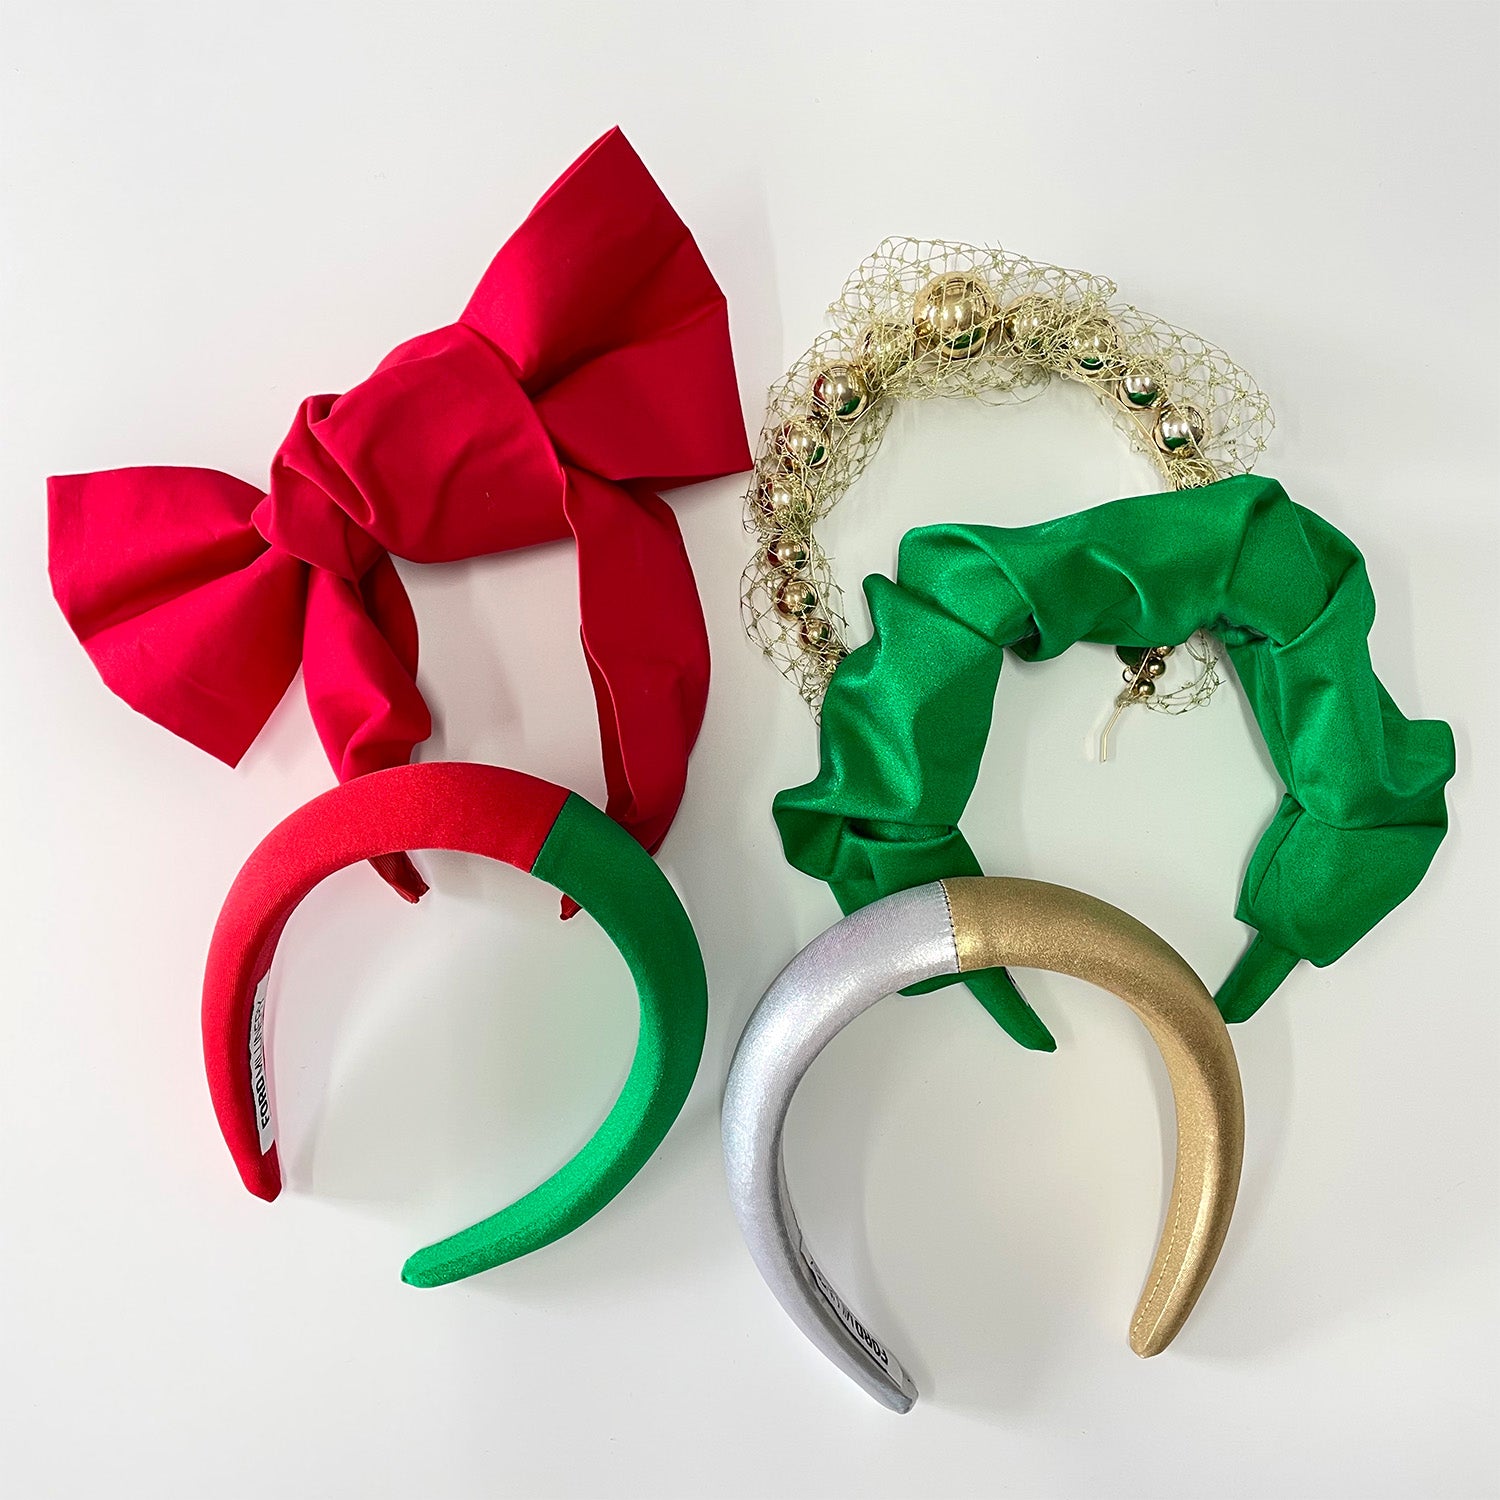 SHOP HOLIDAY ACCESSORIES